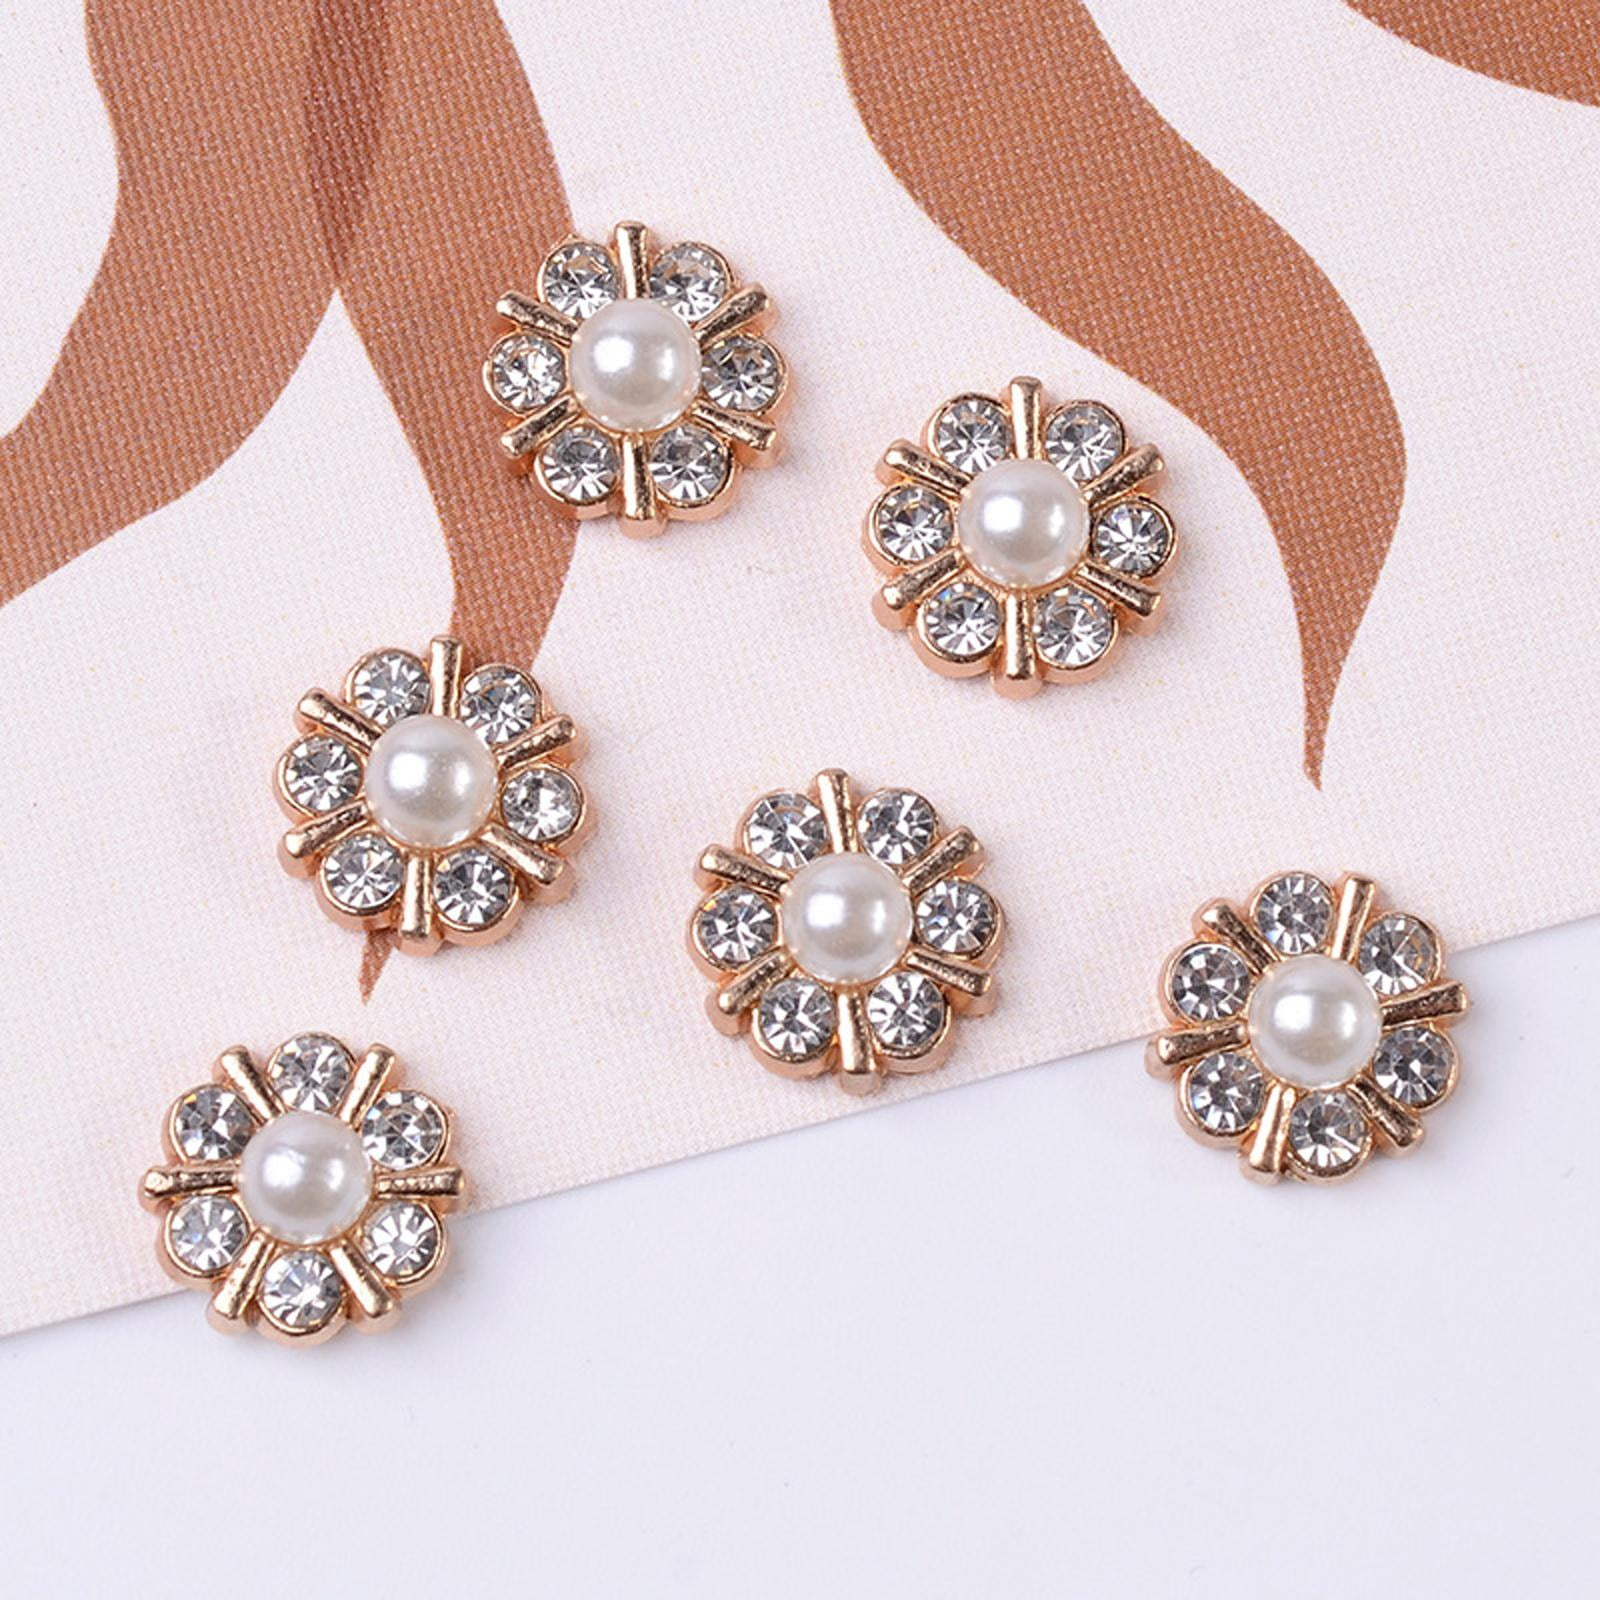 5pcs Round Flower Shape Pearl Rhinestone Buttons Sew on Rhinestone Applique  For DIY Jewelry Bags Decoration - AliExpress